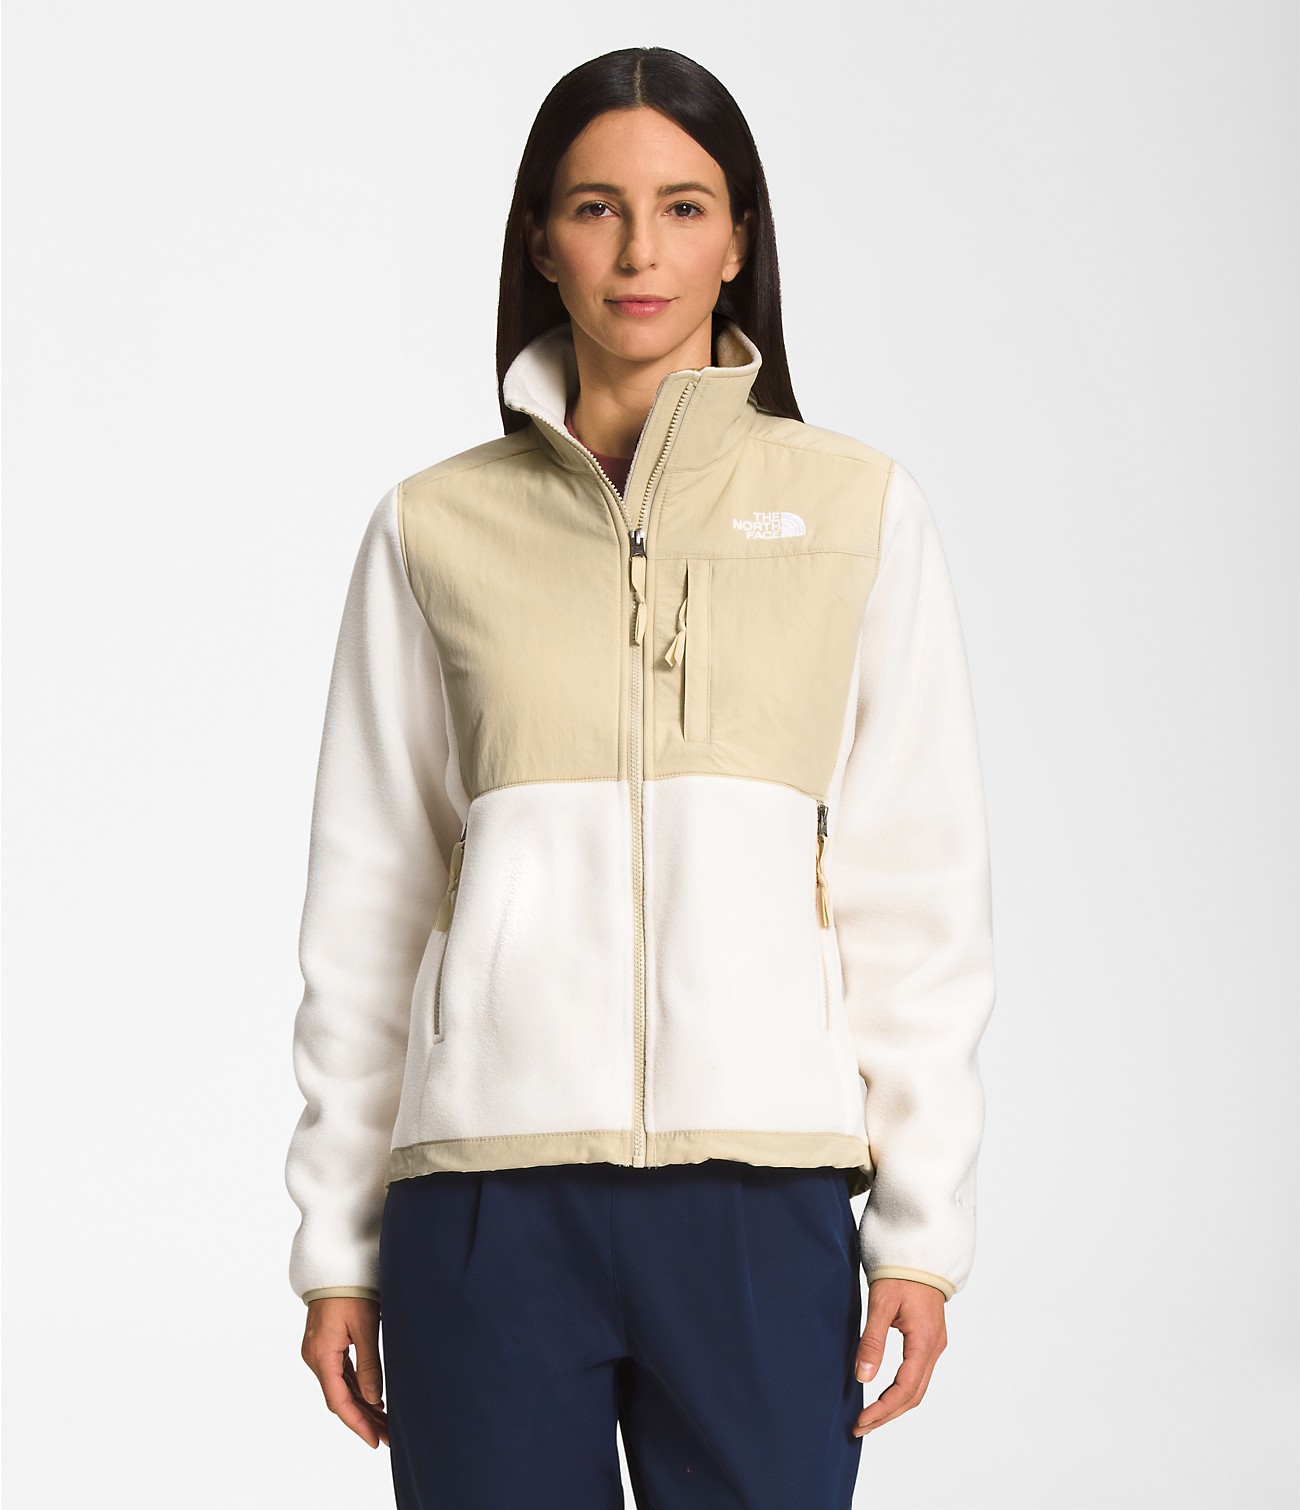 Unlock Wilderness' choice in the L.L.Bean Vs North Face comparison, the Denali Jacket by The North Face